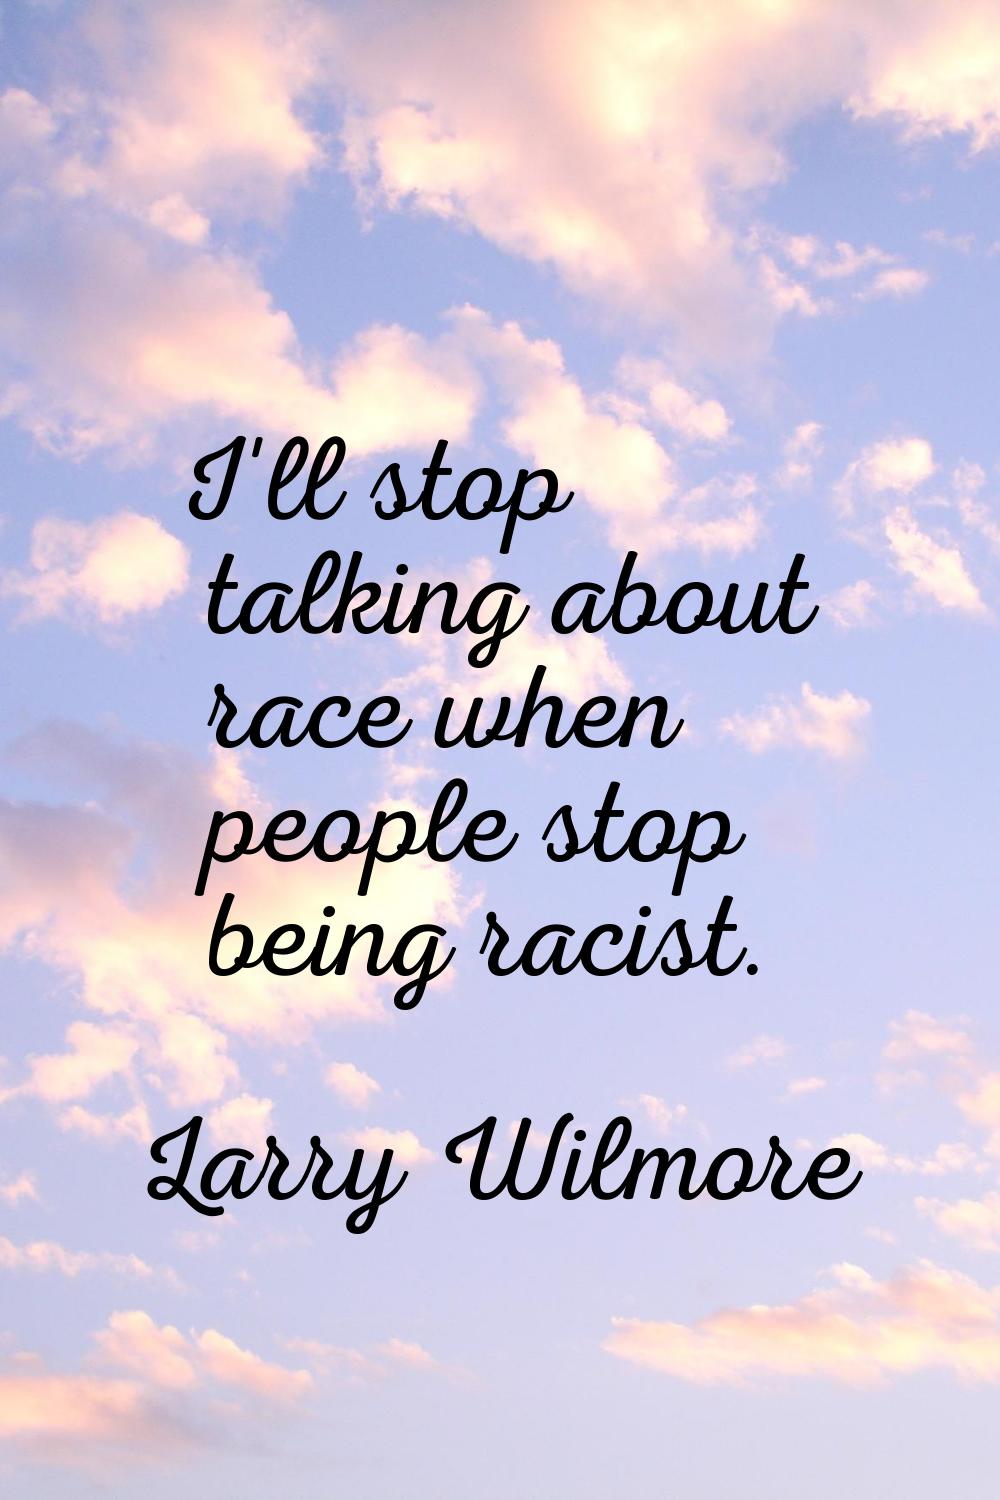 I'll stop talking about race when people stop being racist.